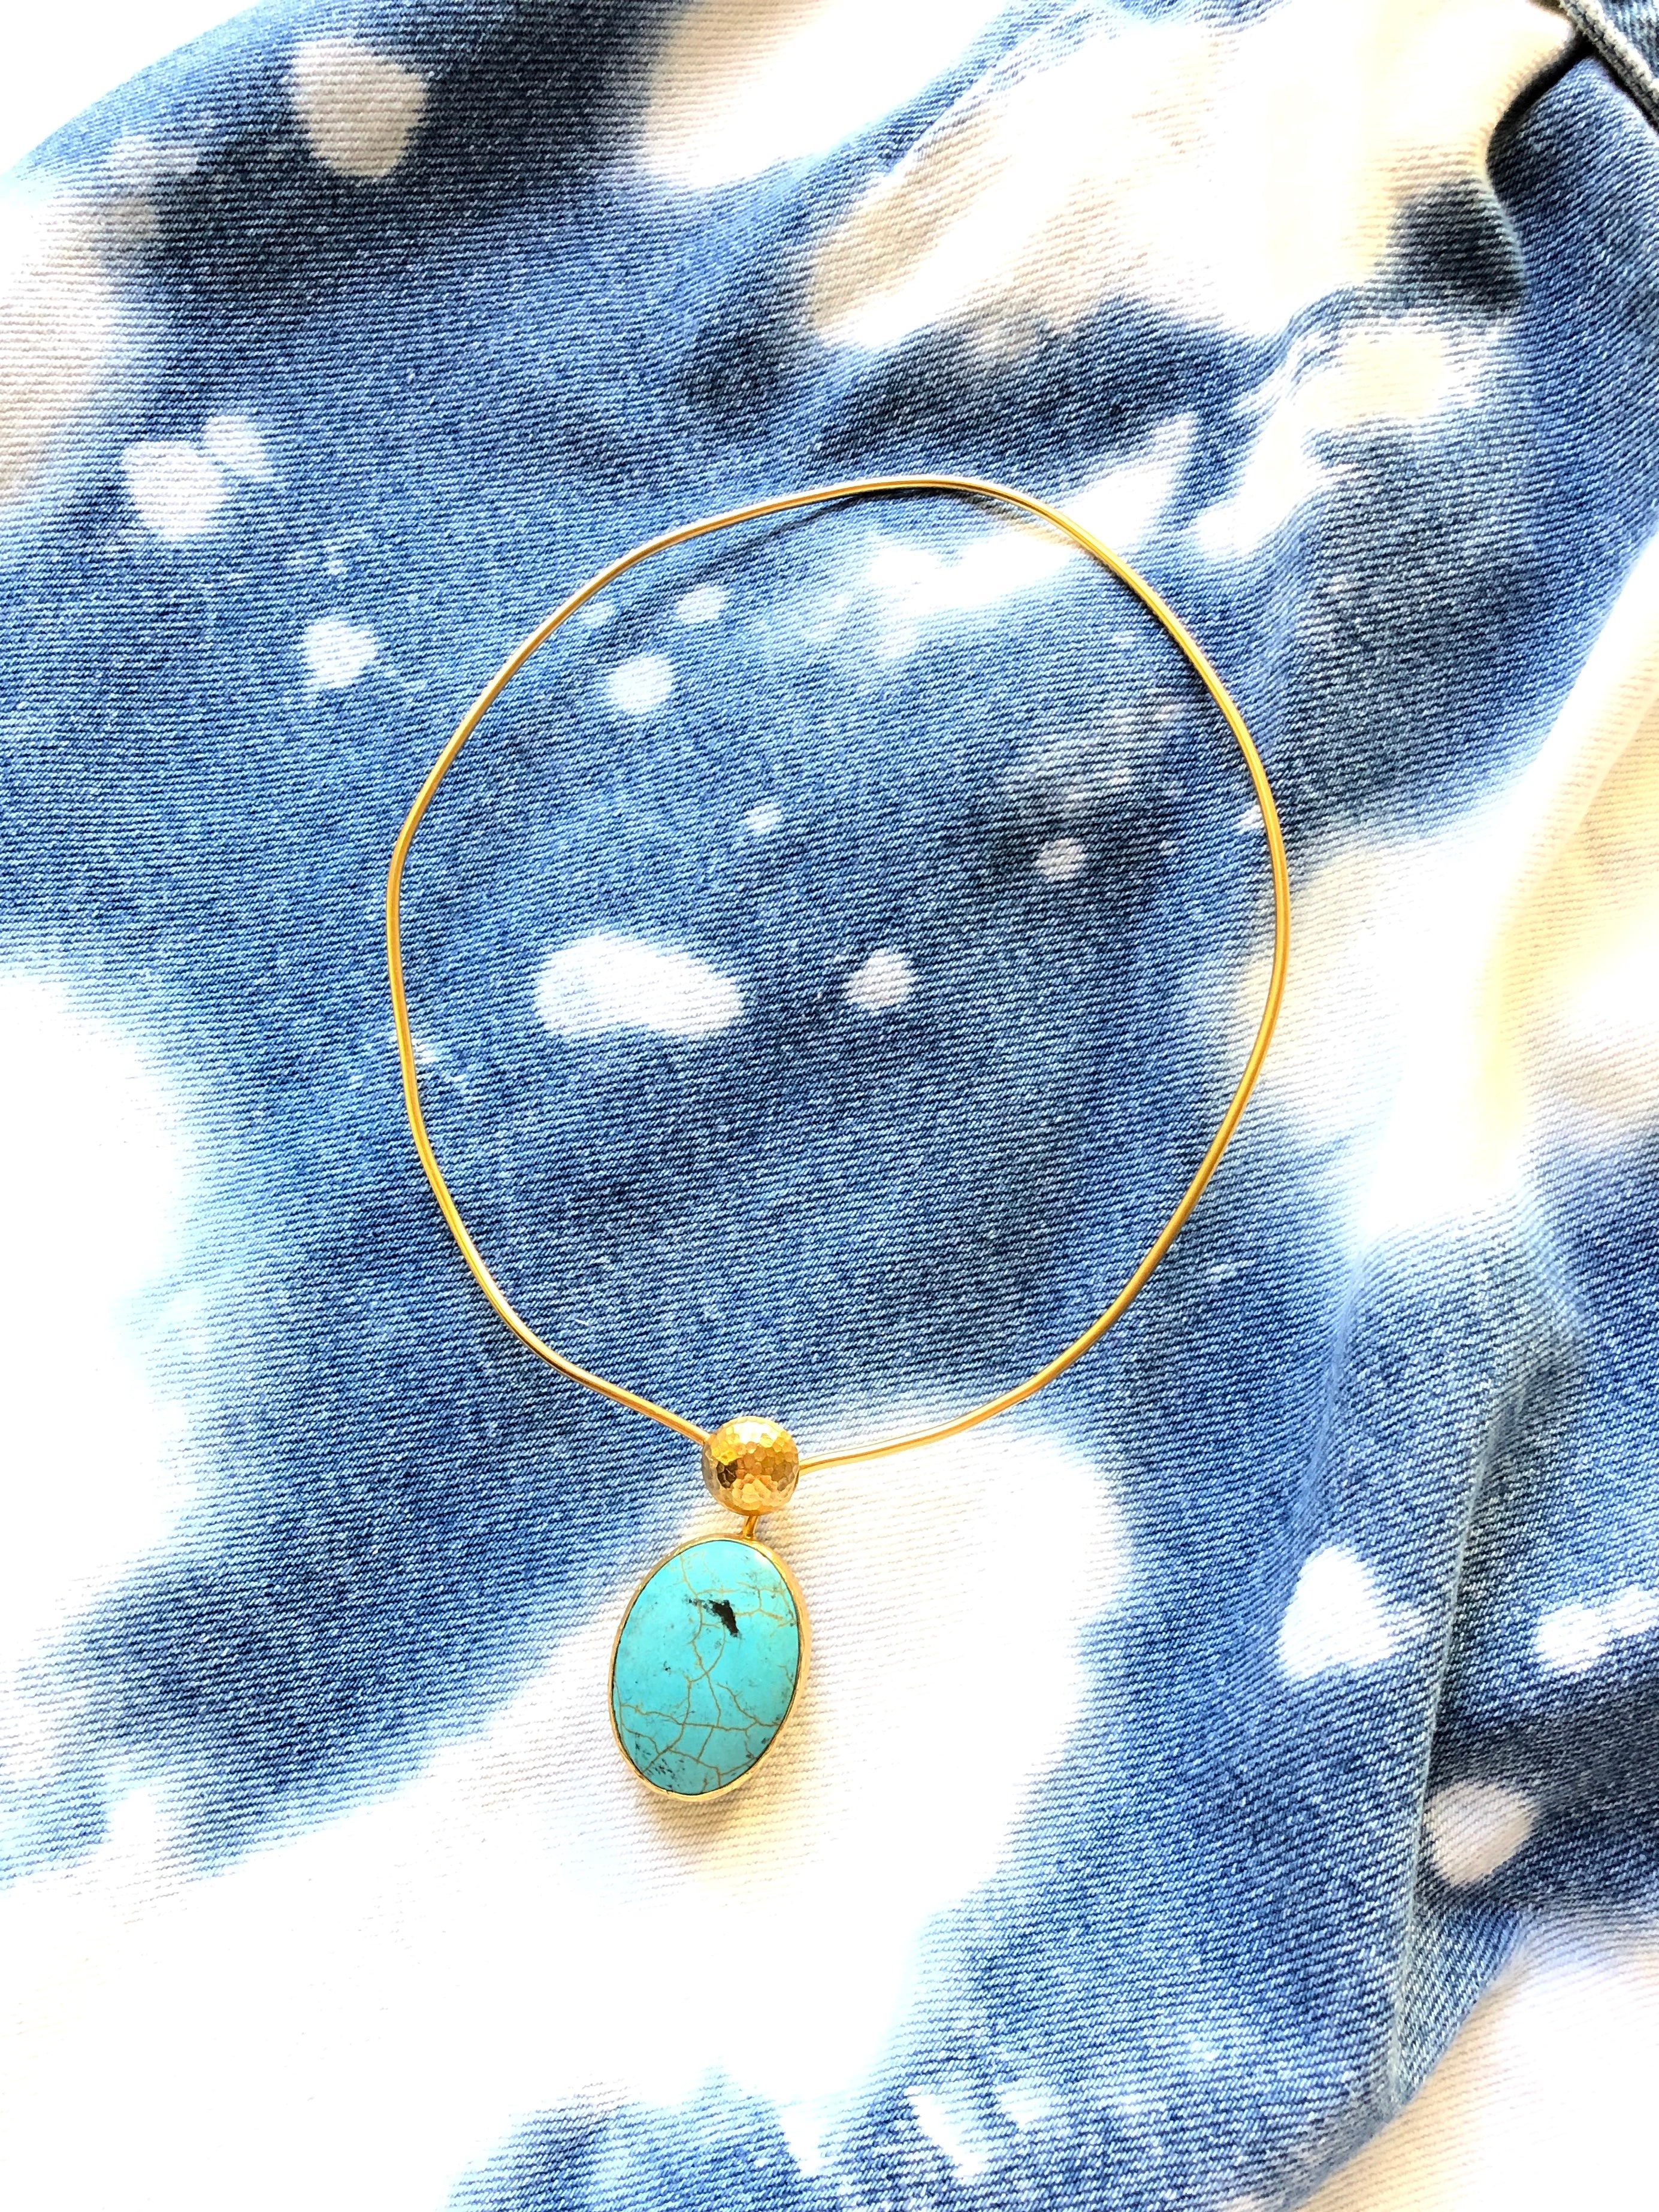 Vintage Rare Turquoise 14k Gold Necklace